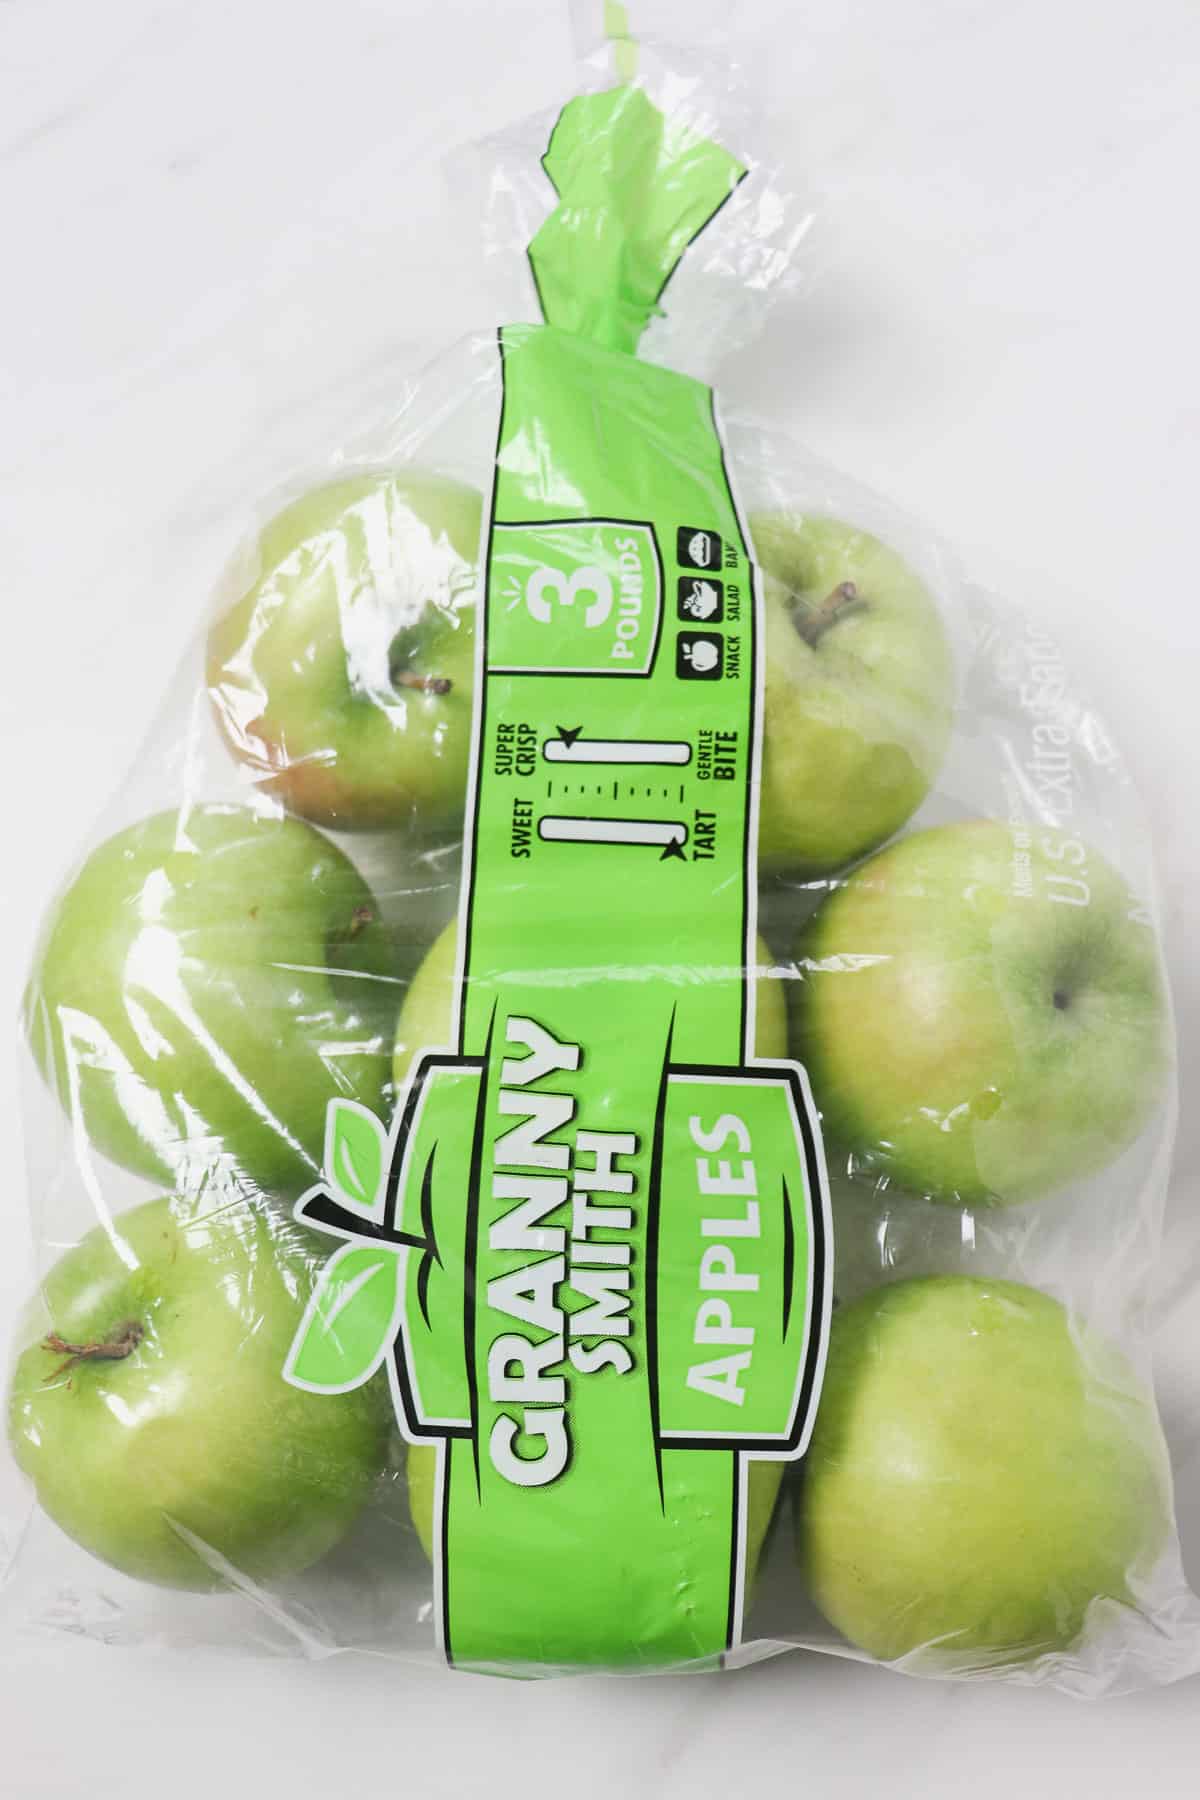 bag of granny smith apples